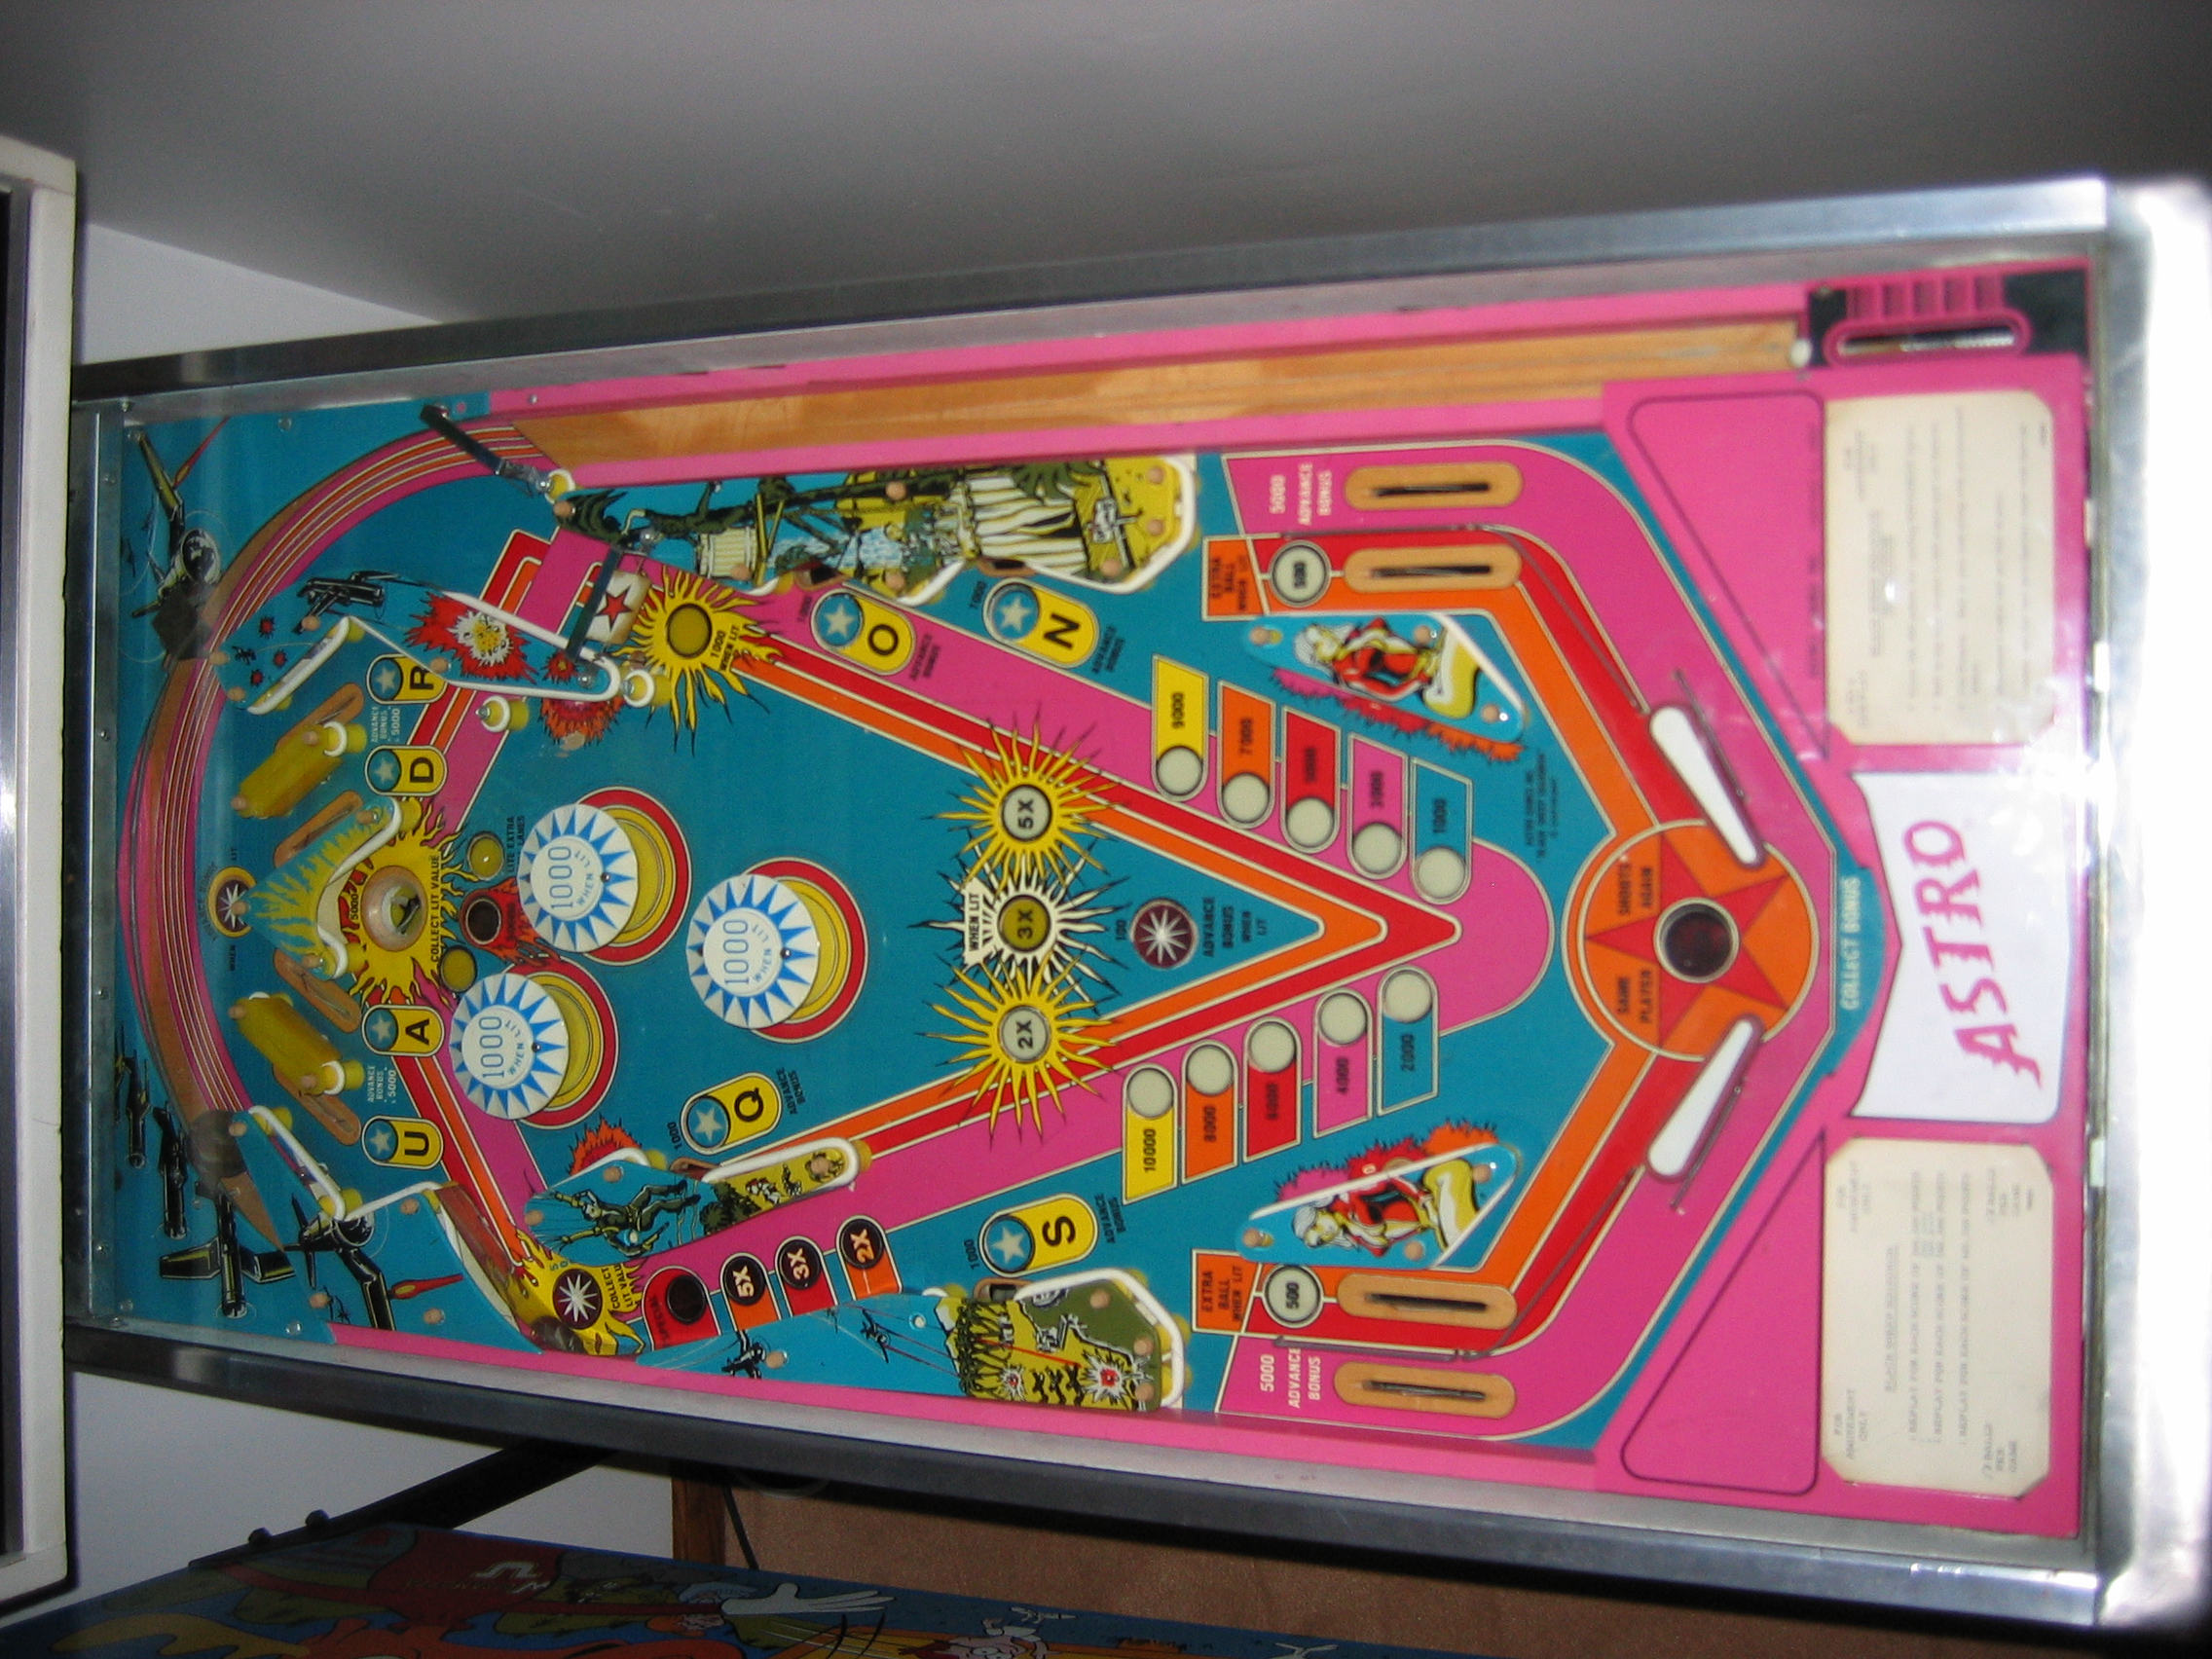 Black Sheep Squadron (Astro Games, 1979) Playfield2